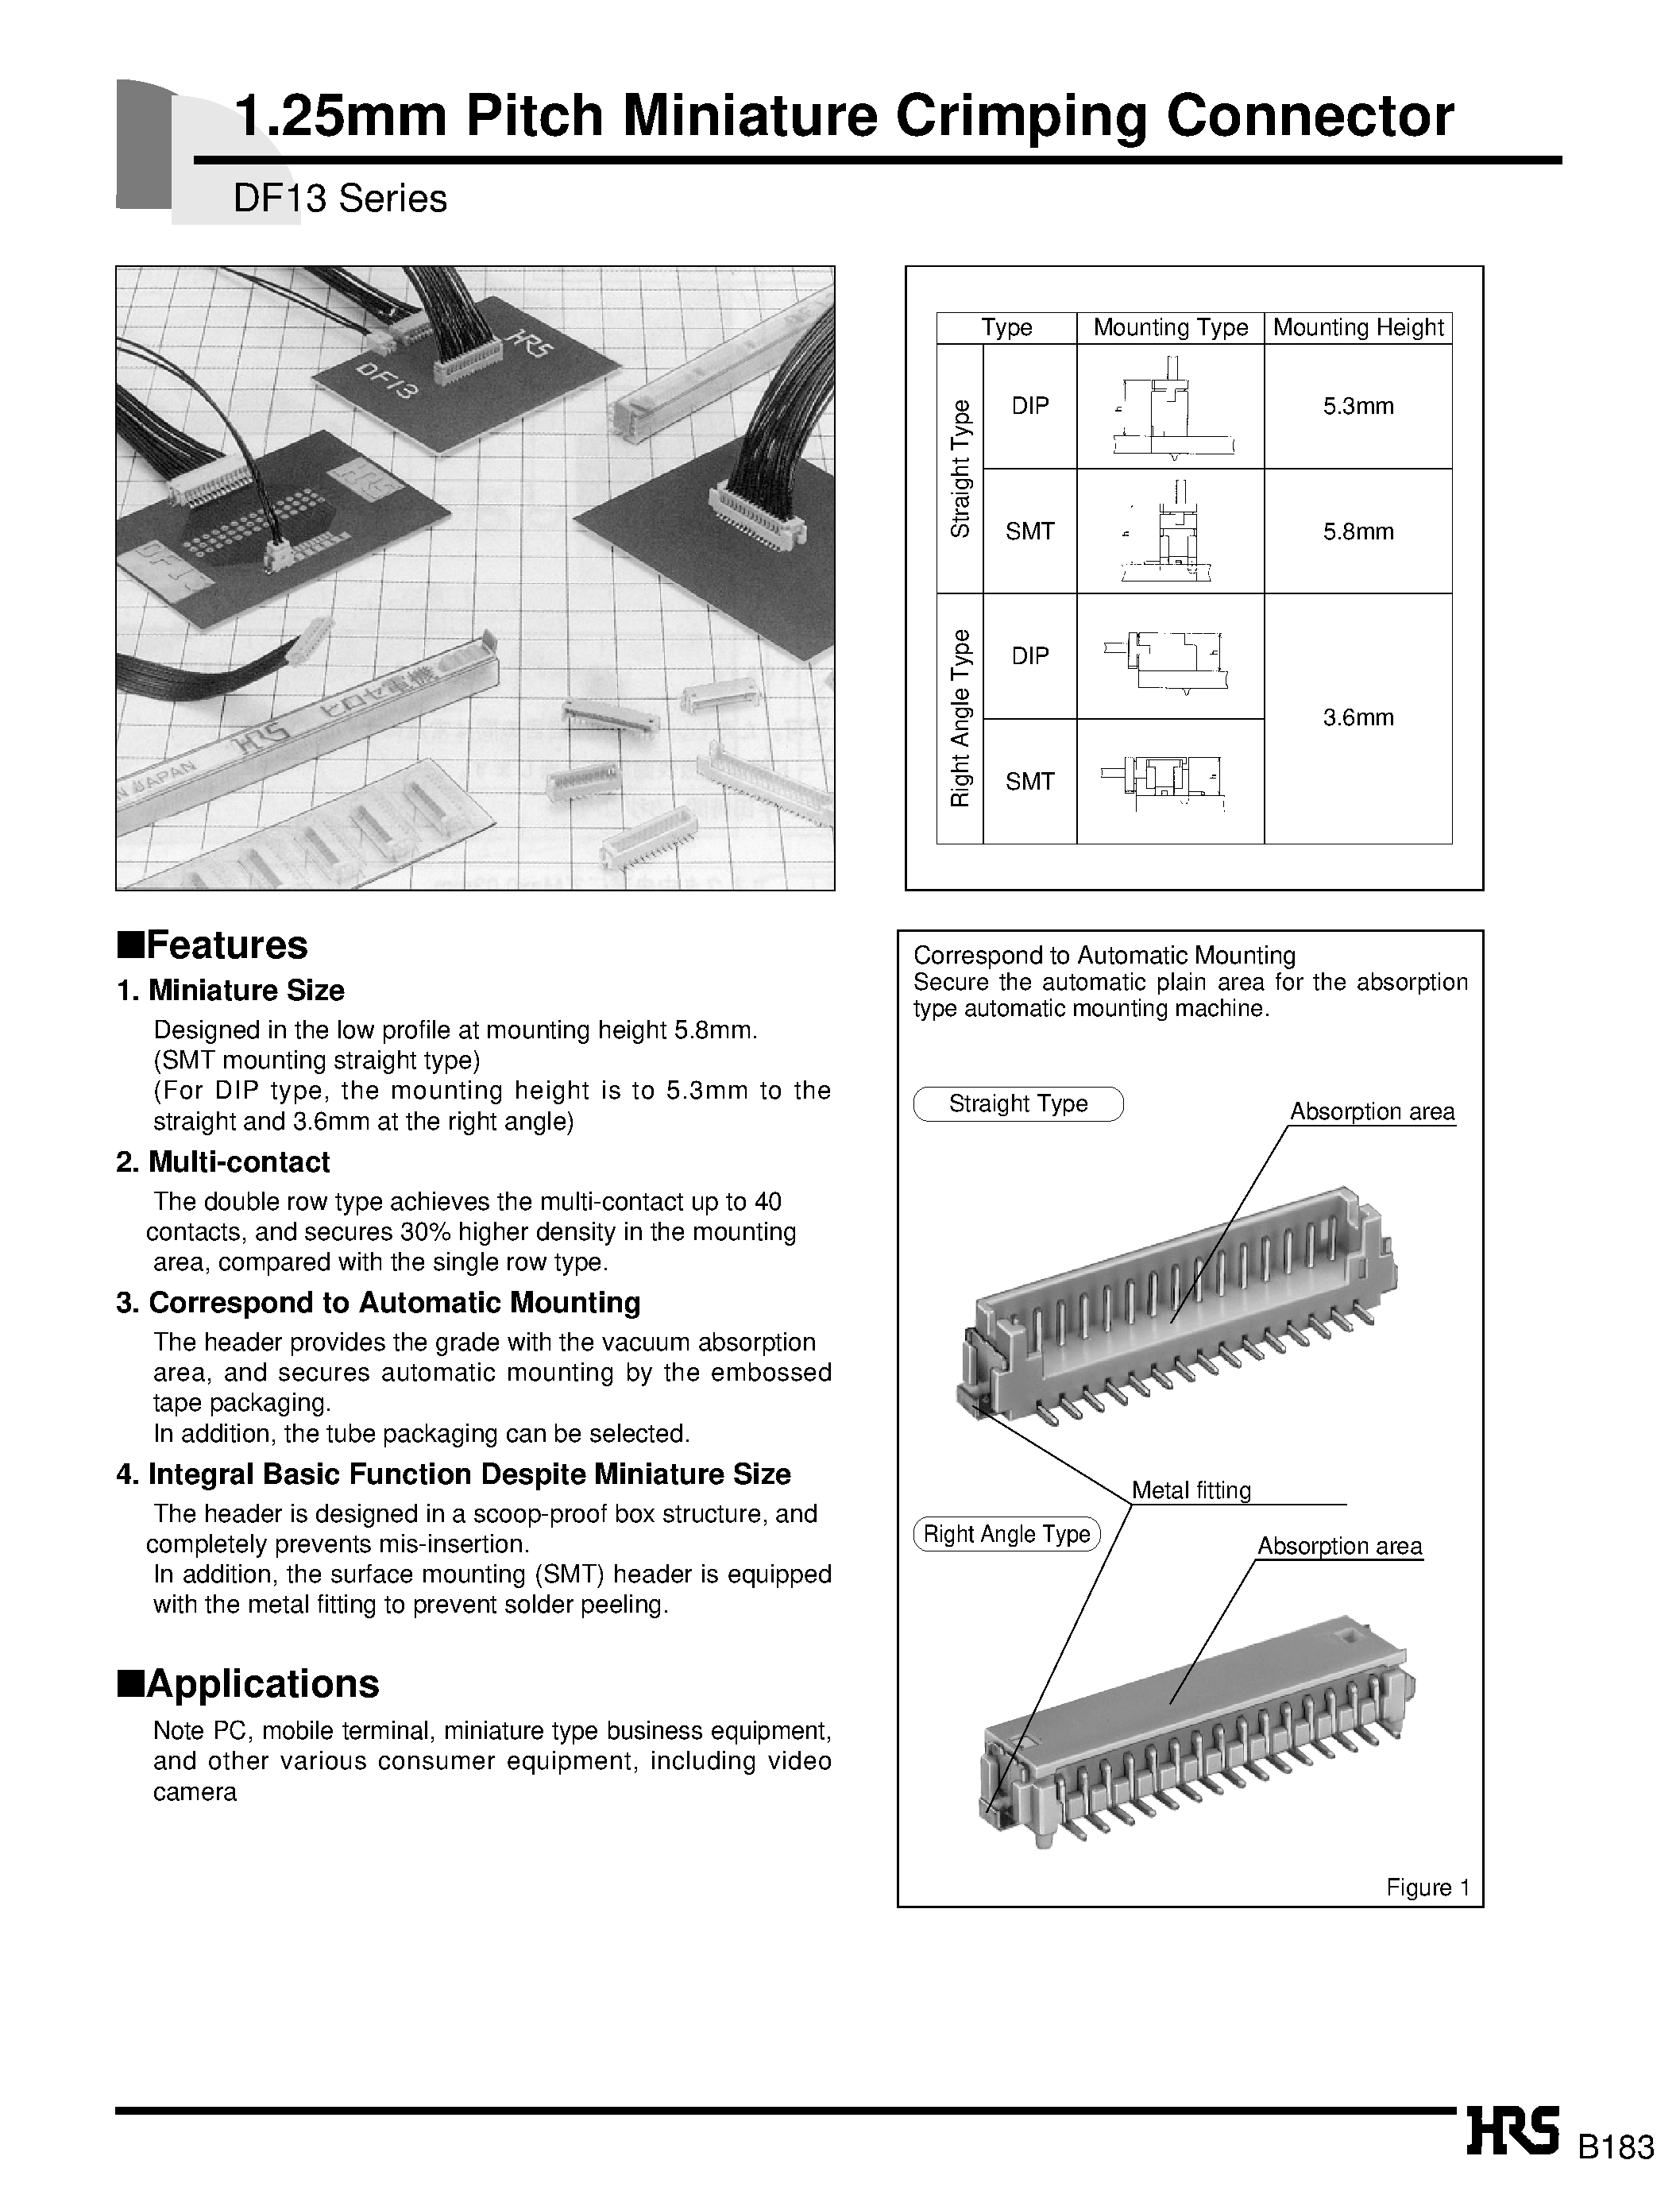 Datasheet DF13-10DP-1.25C - 1.25mm Pitch Miniature Crimping Connector page 1